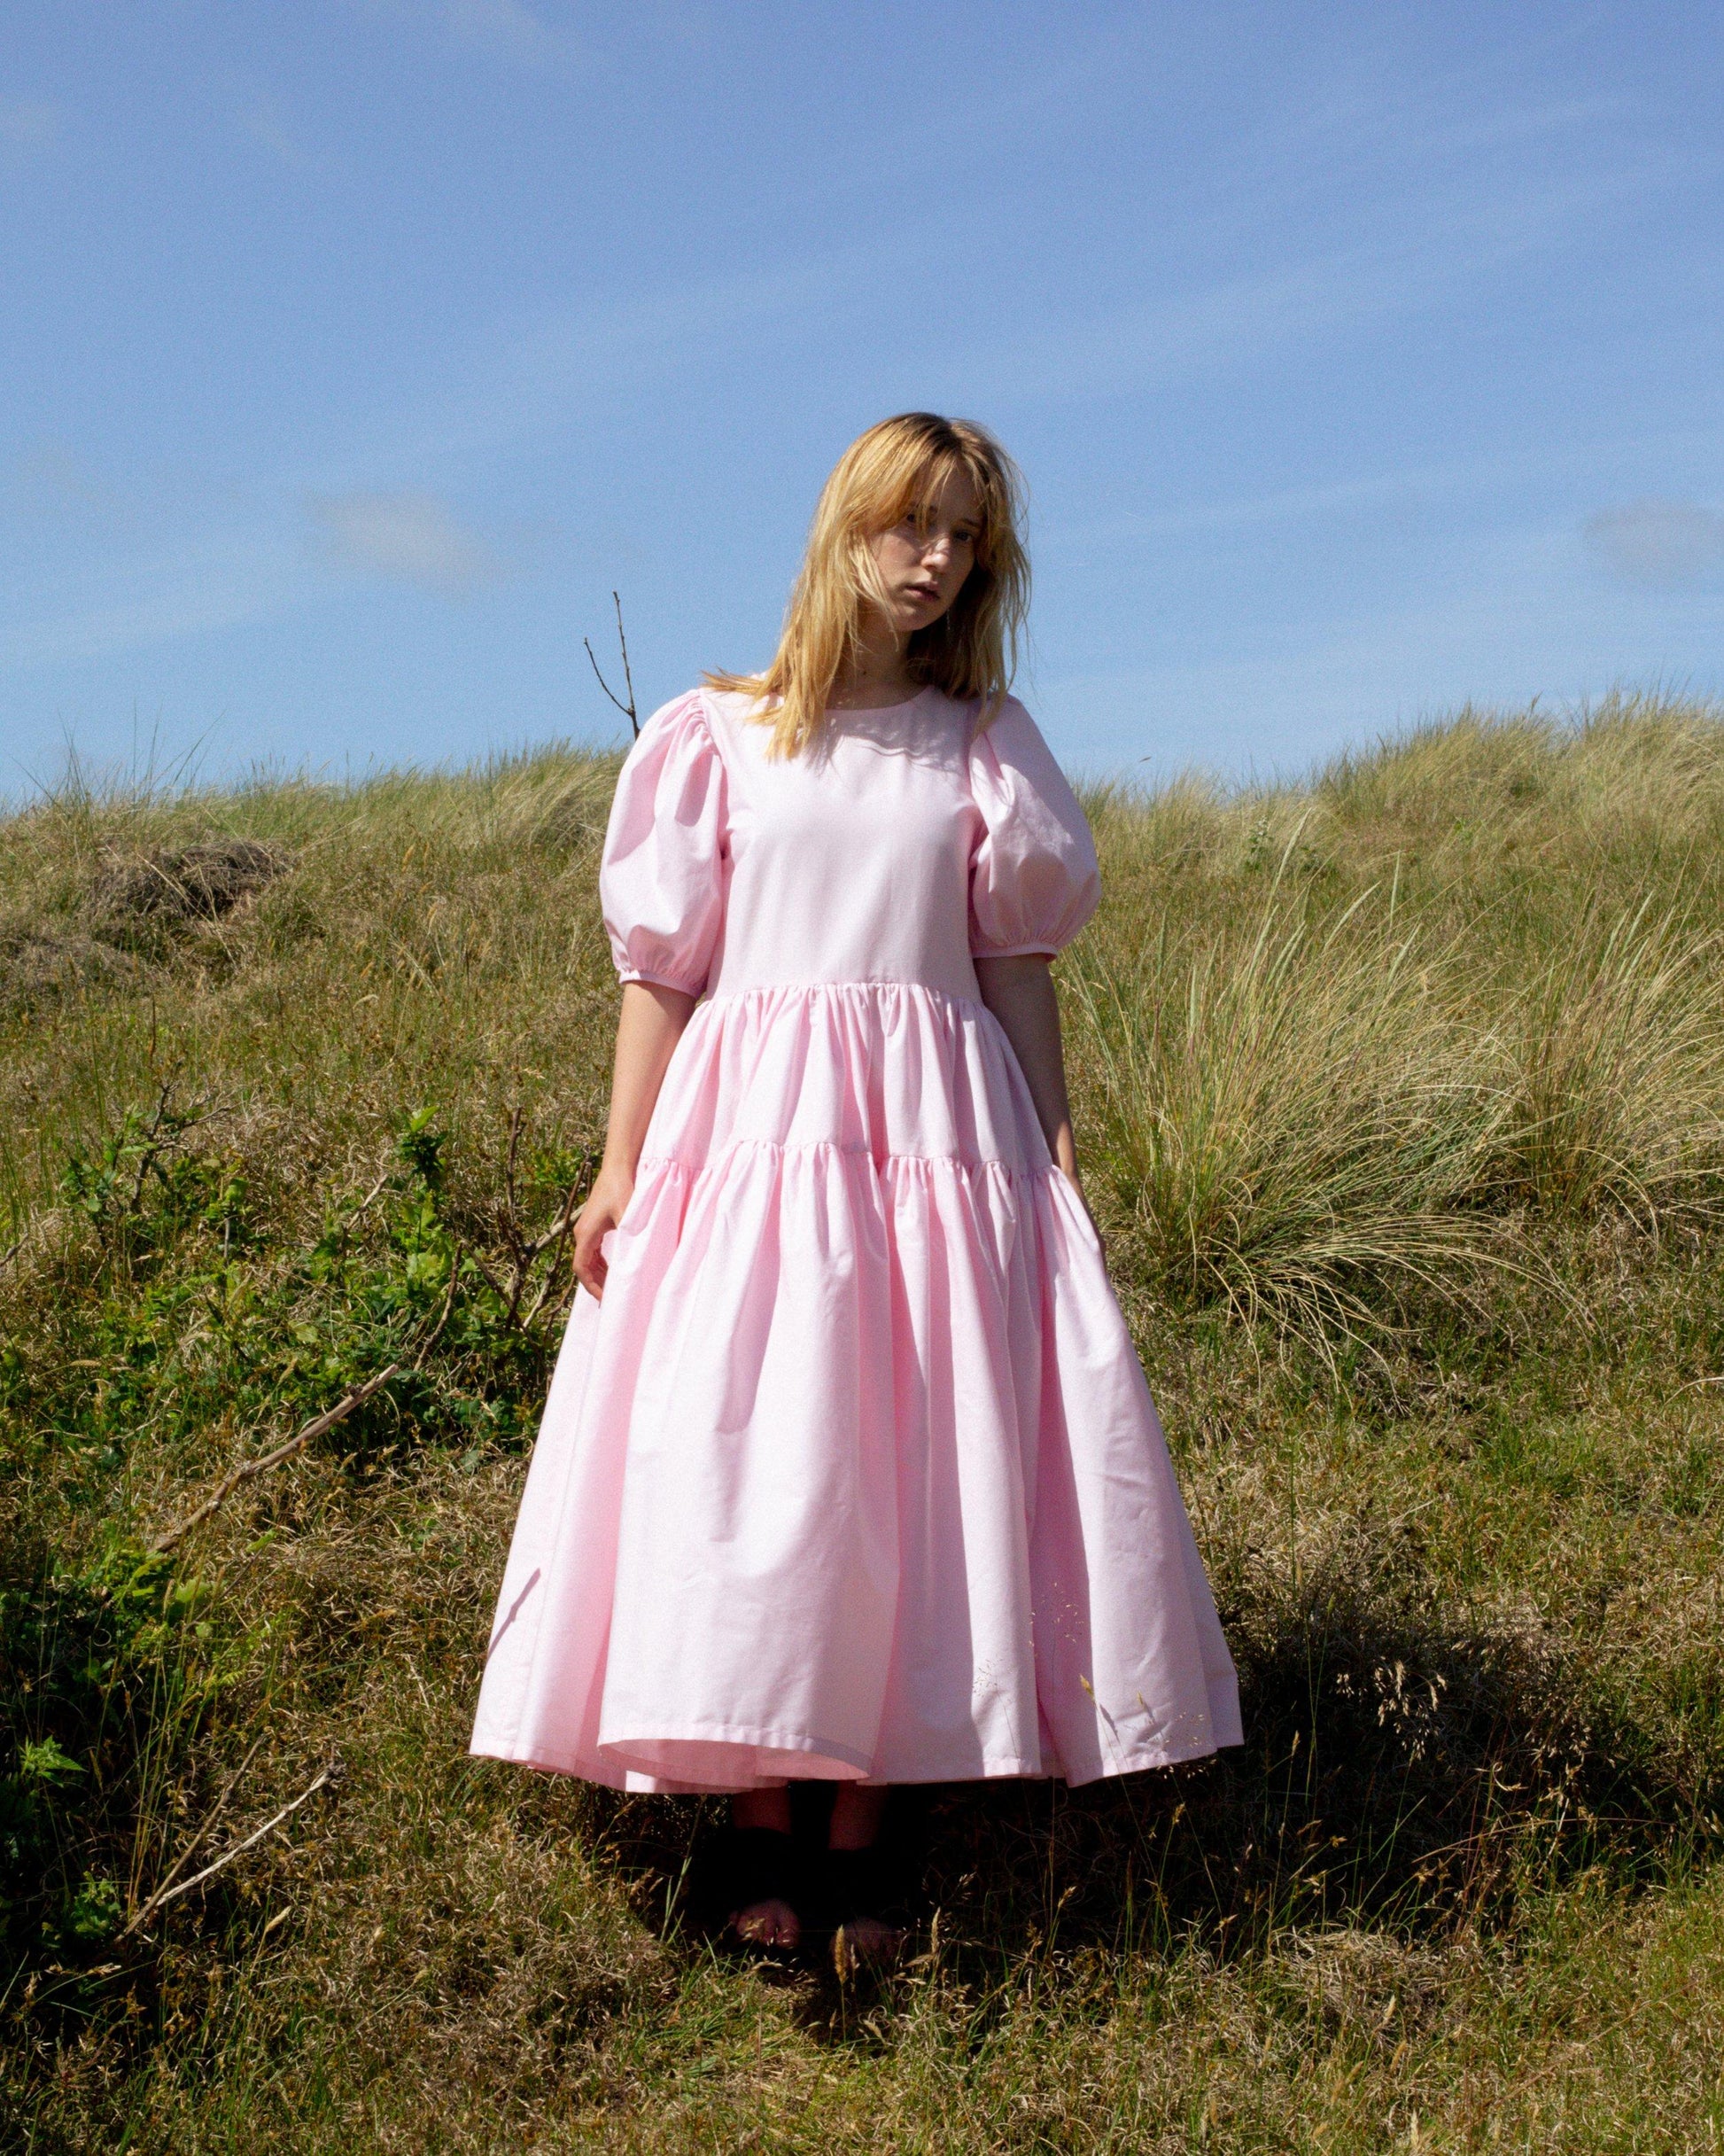 Handmade to order with deadstock quality cotton poplin in baby pink, this limited unique dress is perfect for the summer